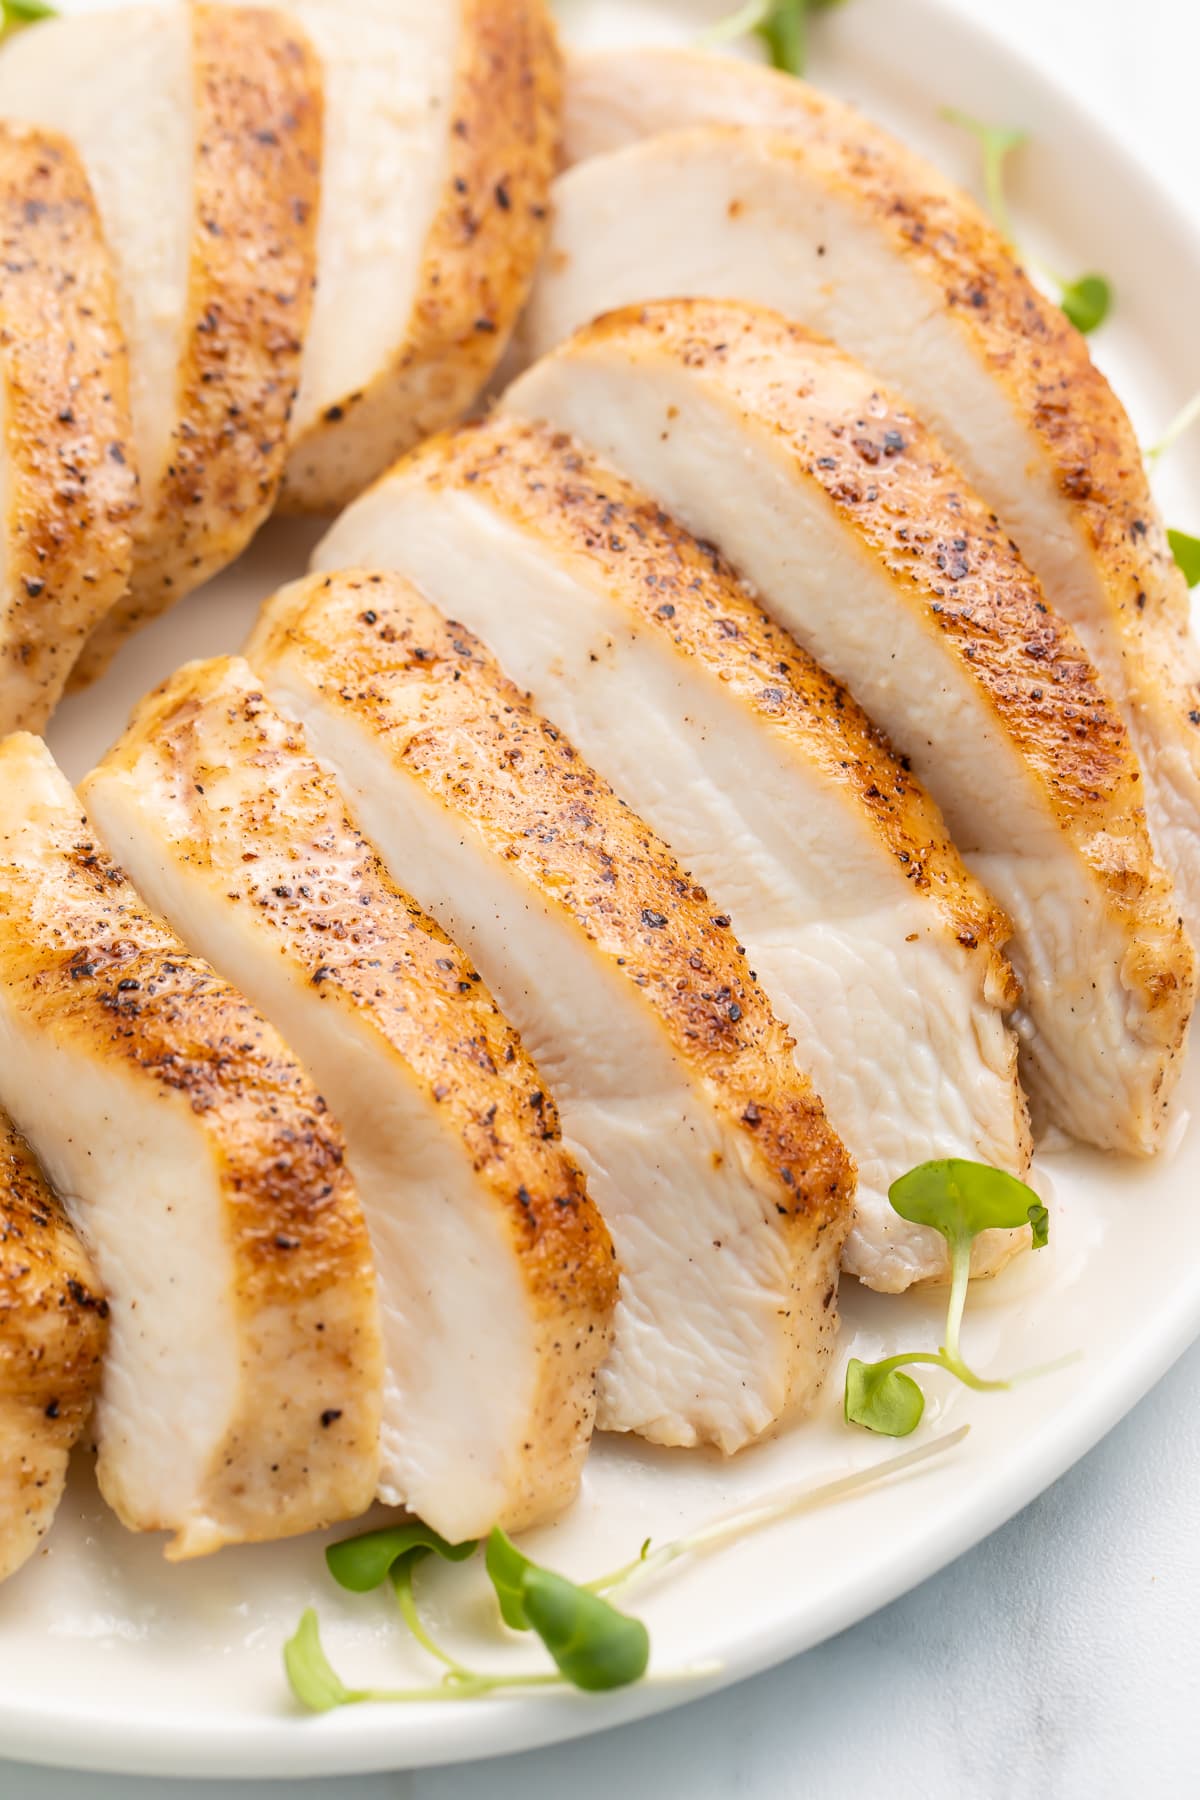 Sliced sous vide chicken breast arranged on a platter to show the juicy white meat and the seasoned skin at the same time.